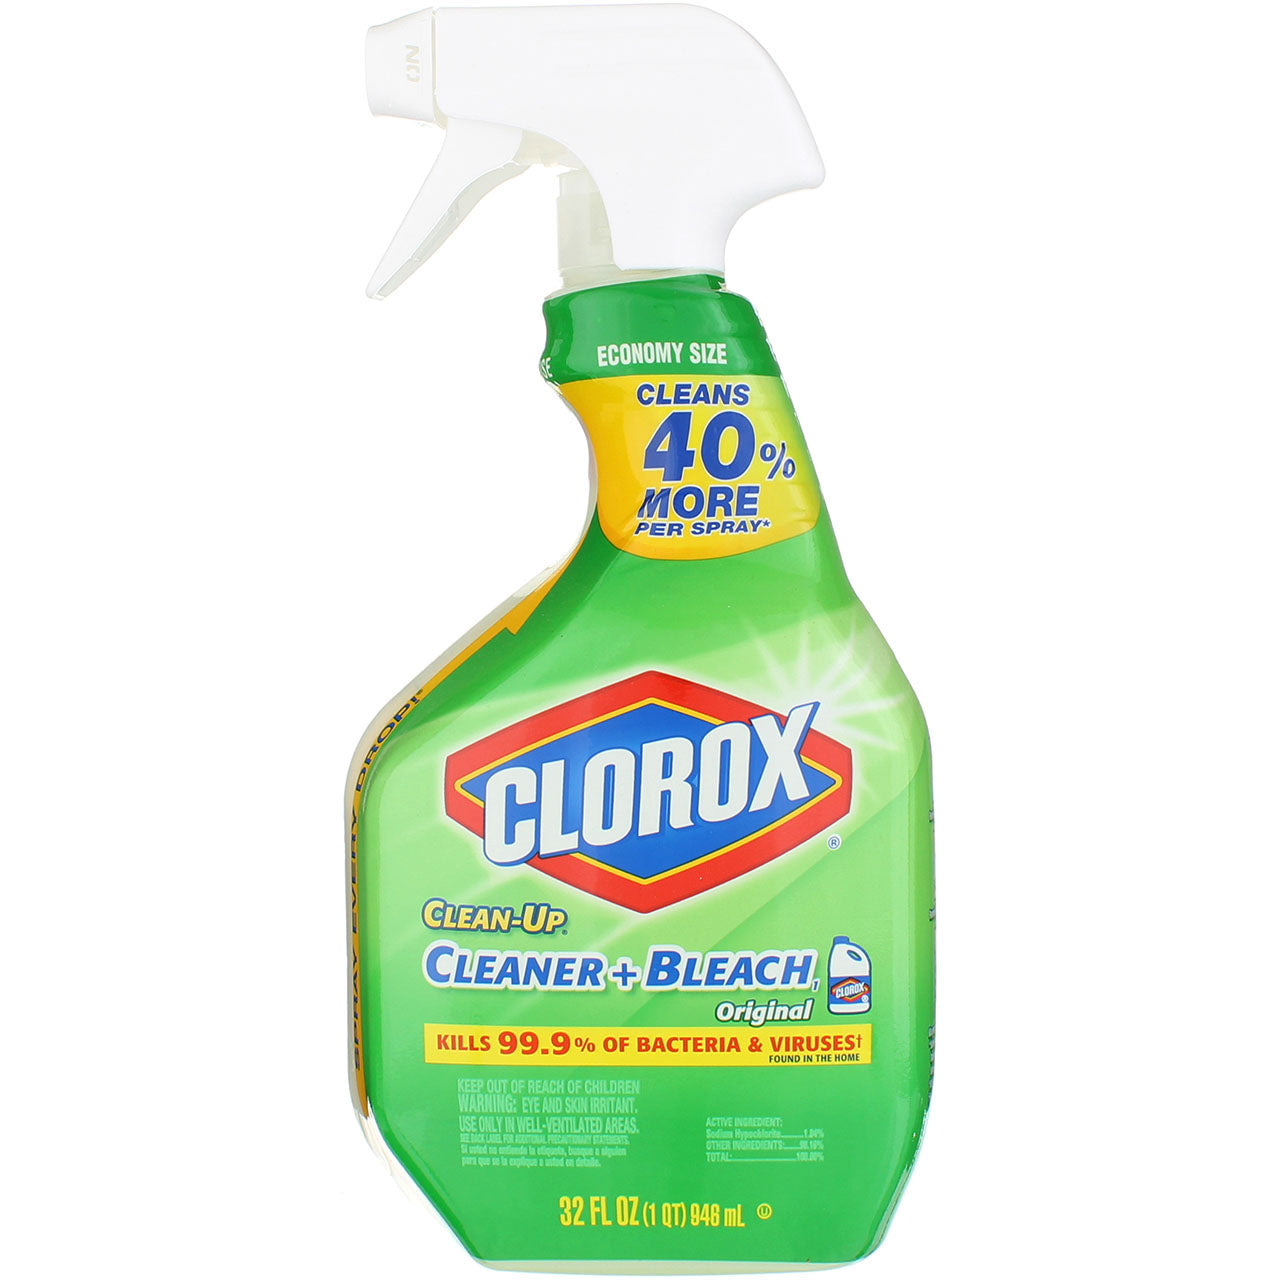 Clorox® Clean-Up Disinfectant Cleaner with Bleach: 32 Oz. Spray